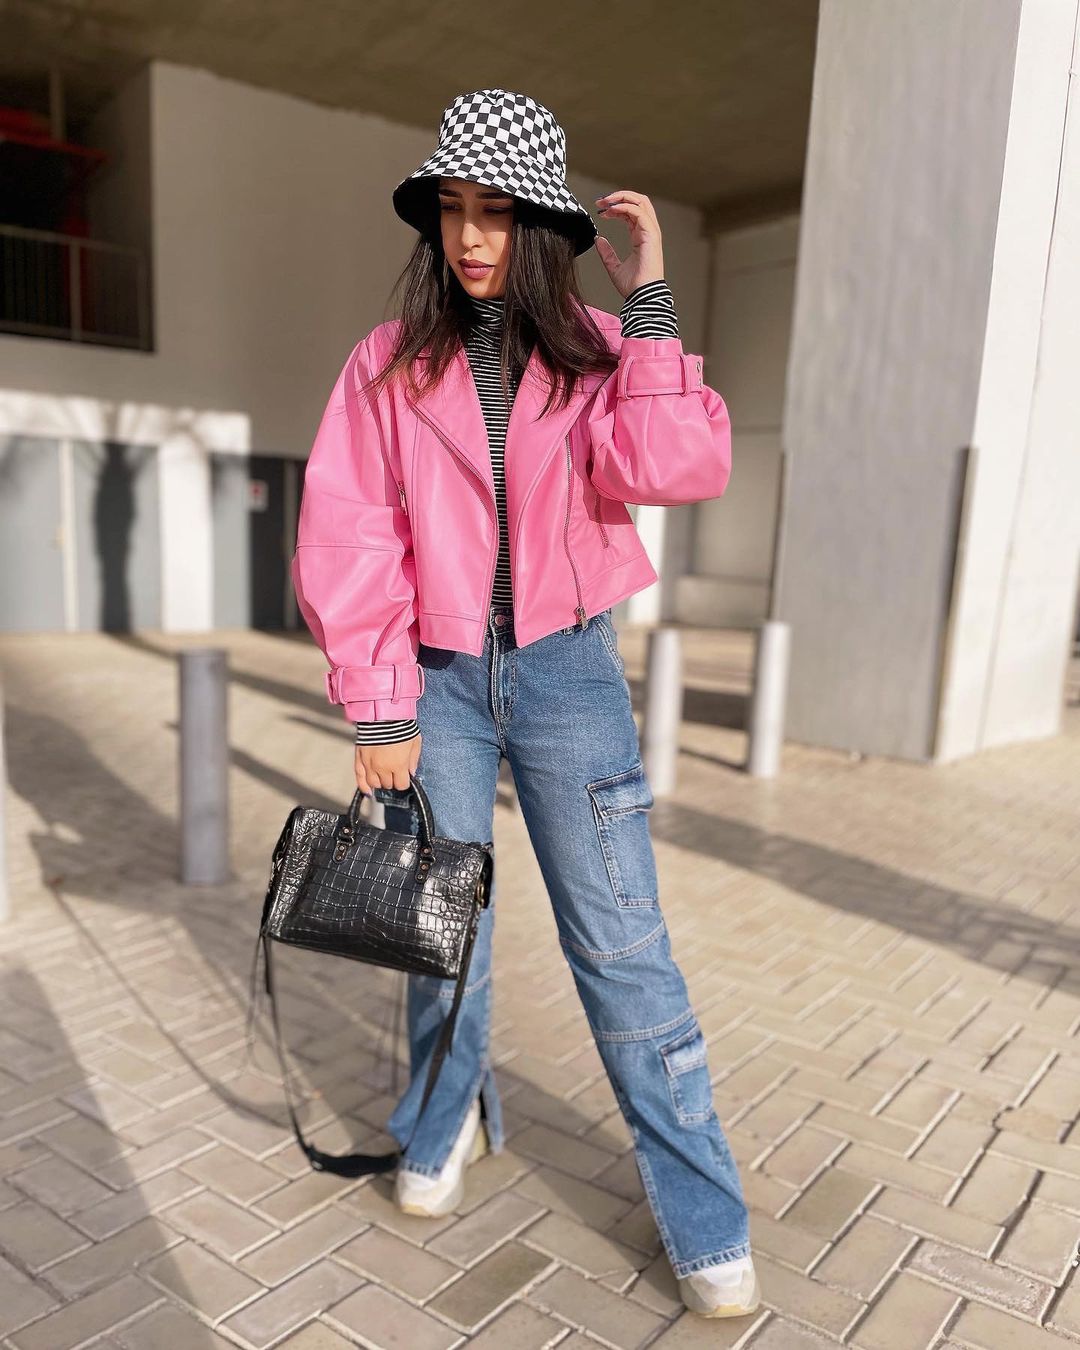 20 Stylish Pink Jacket Outfits You Need to Try